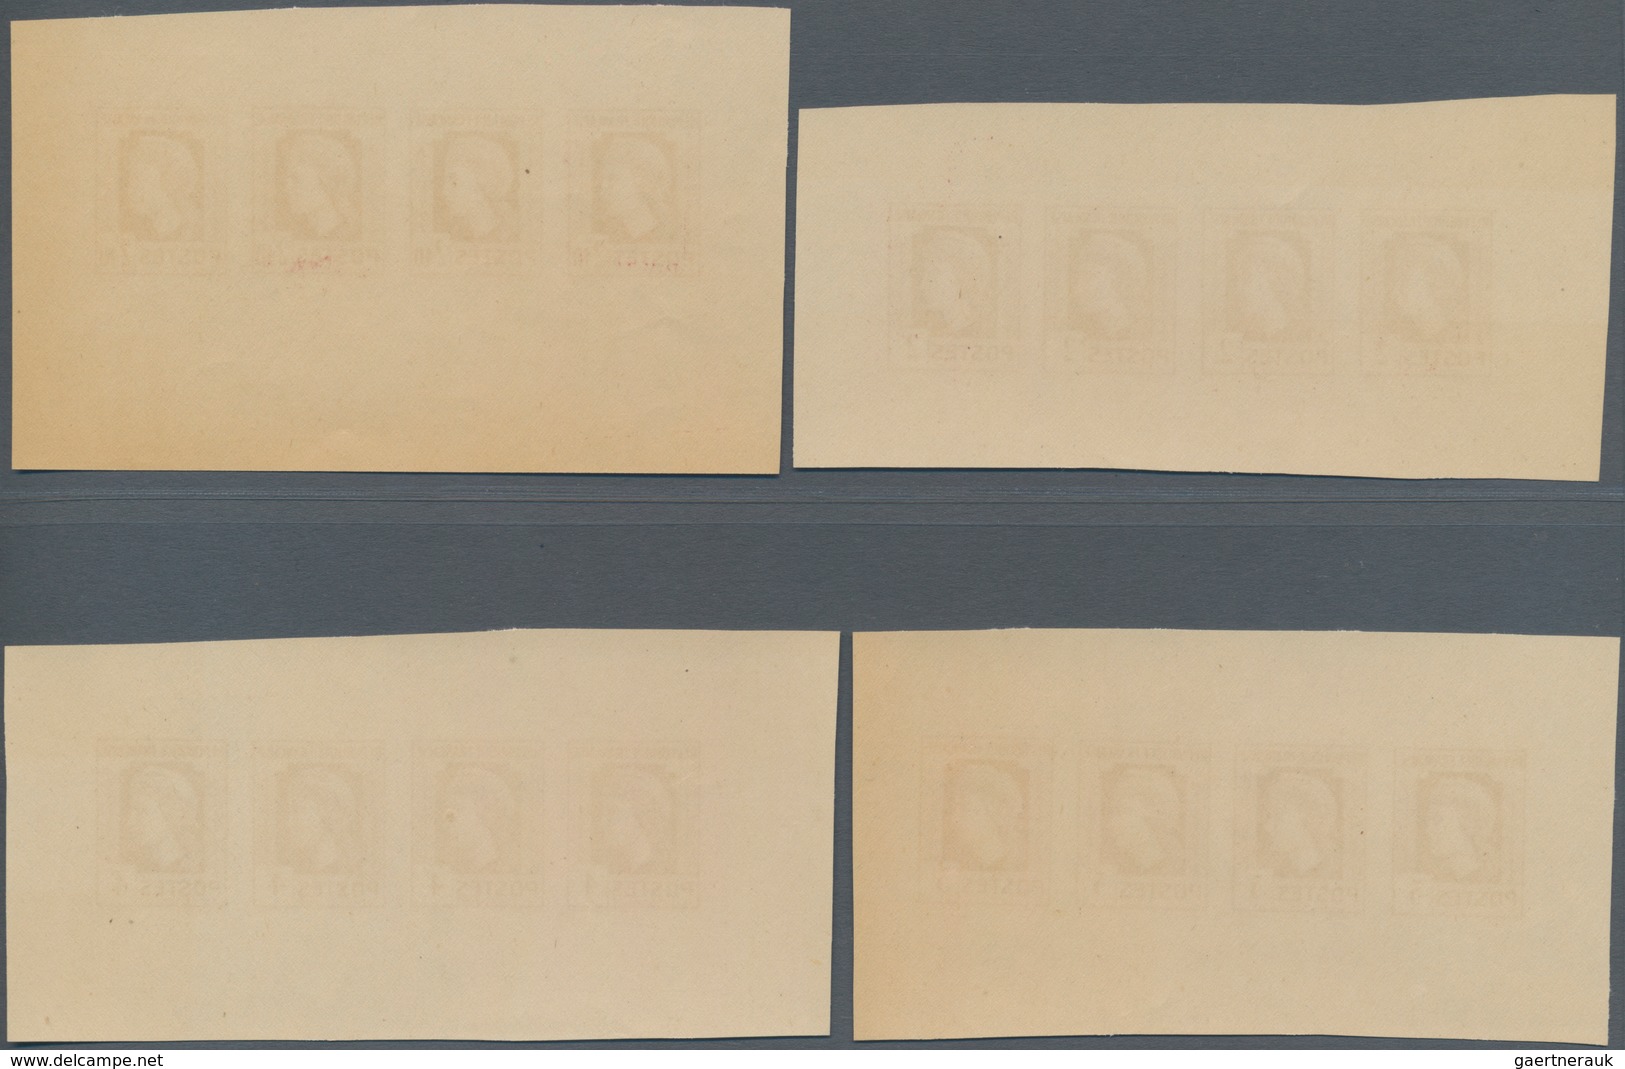 Frankreich: 1944, Definitives "Marianne", Not Issued, Group Of Ten Imperforated Panes Of Four Stamps - Unused Stamps